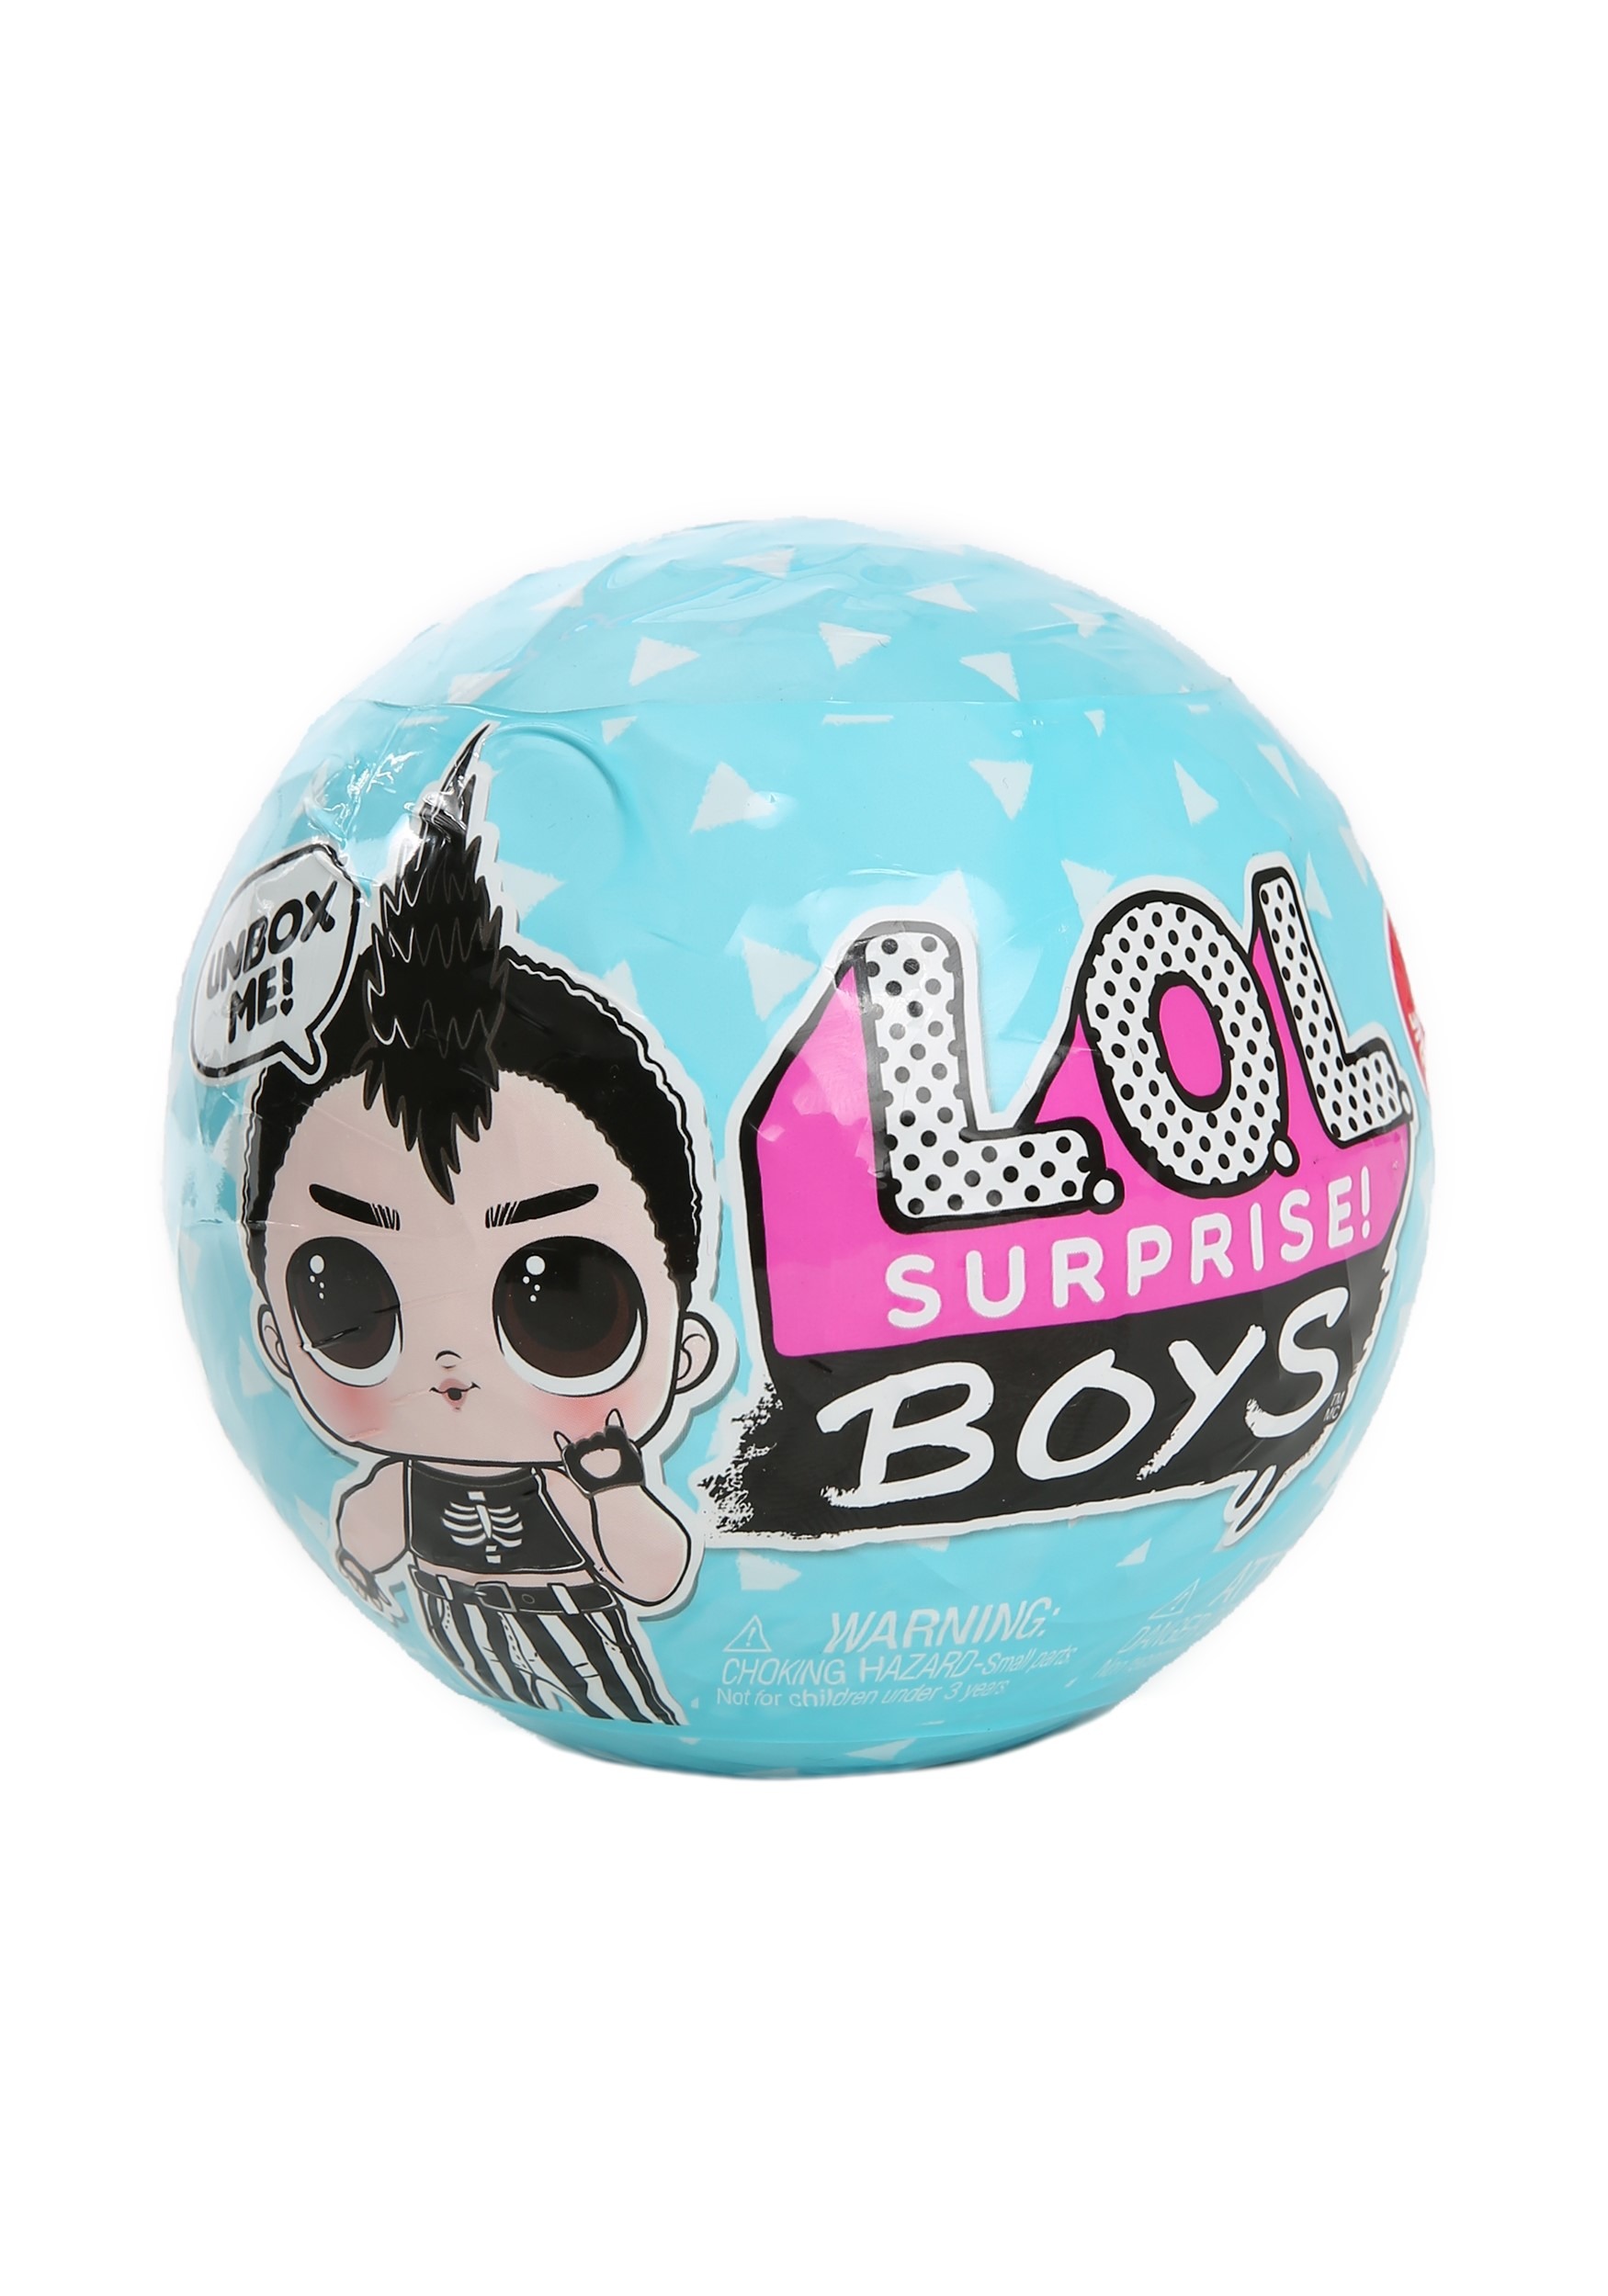 L.O.L. Surprise! Boys Brother Doll